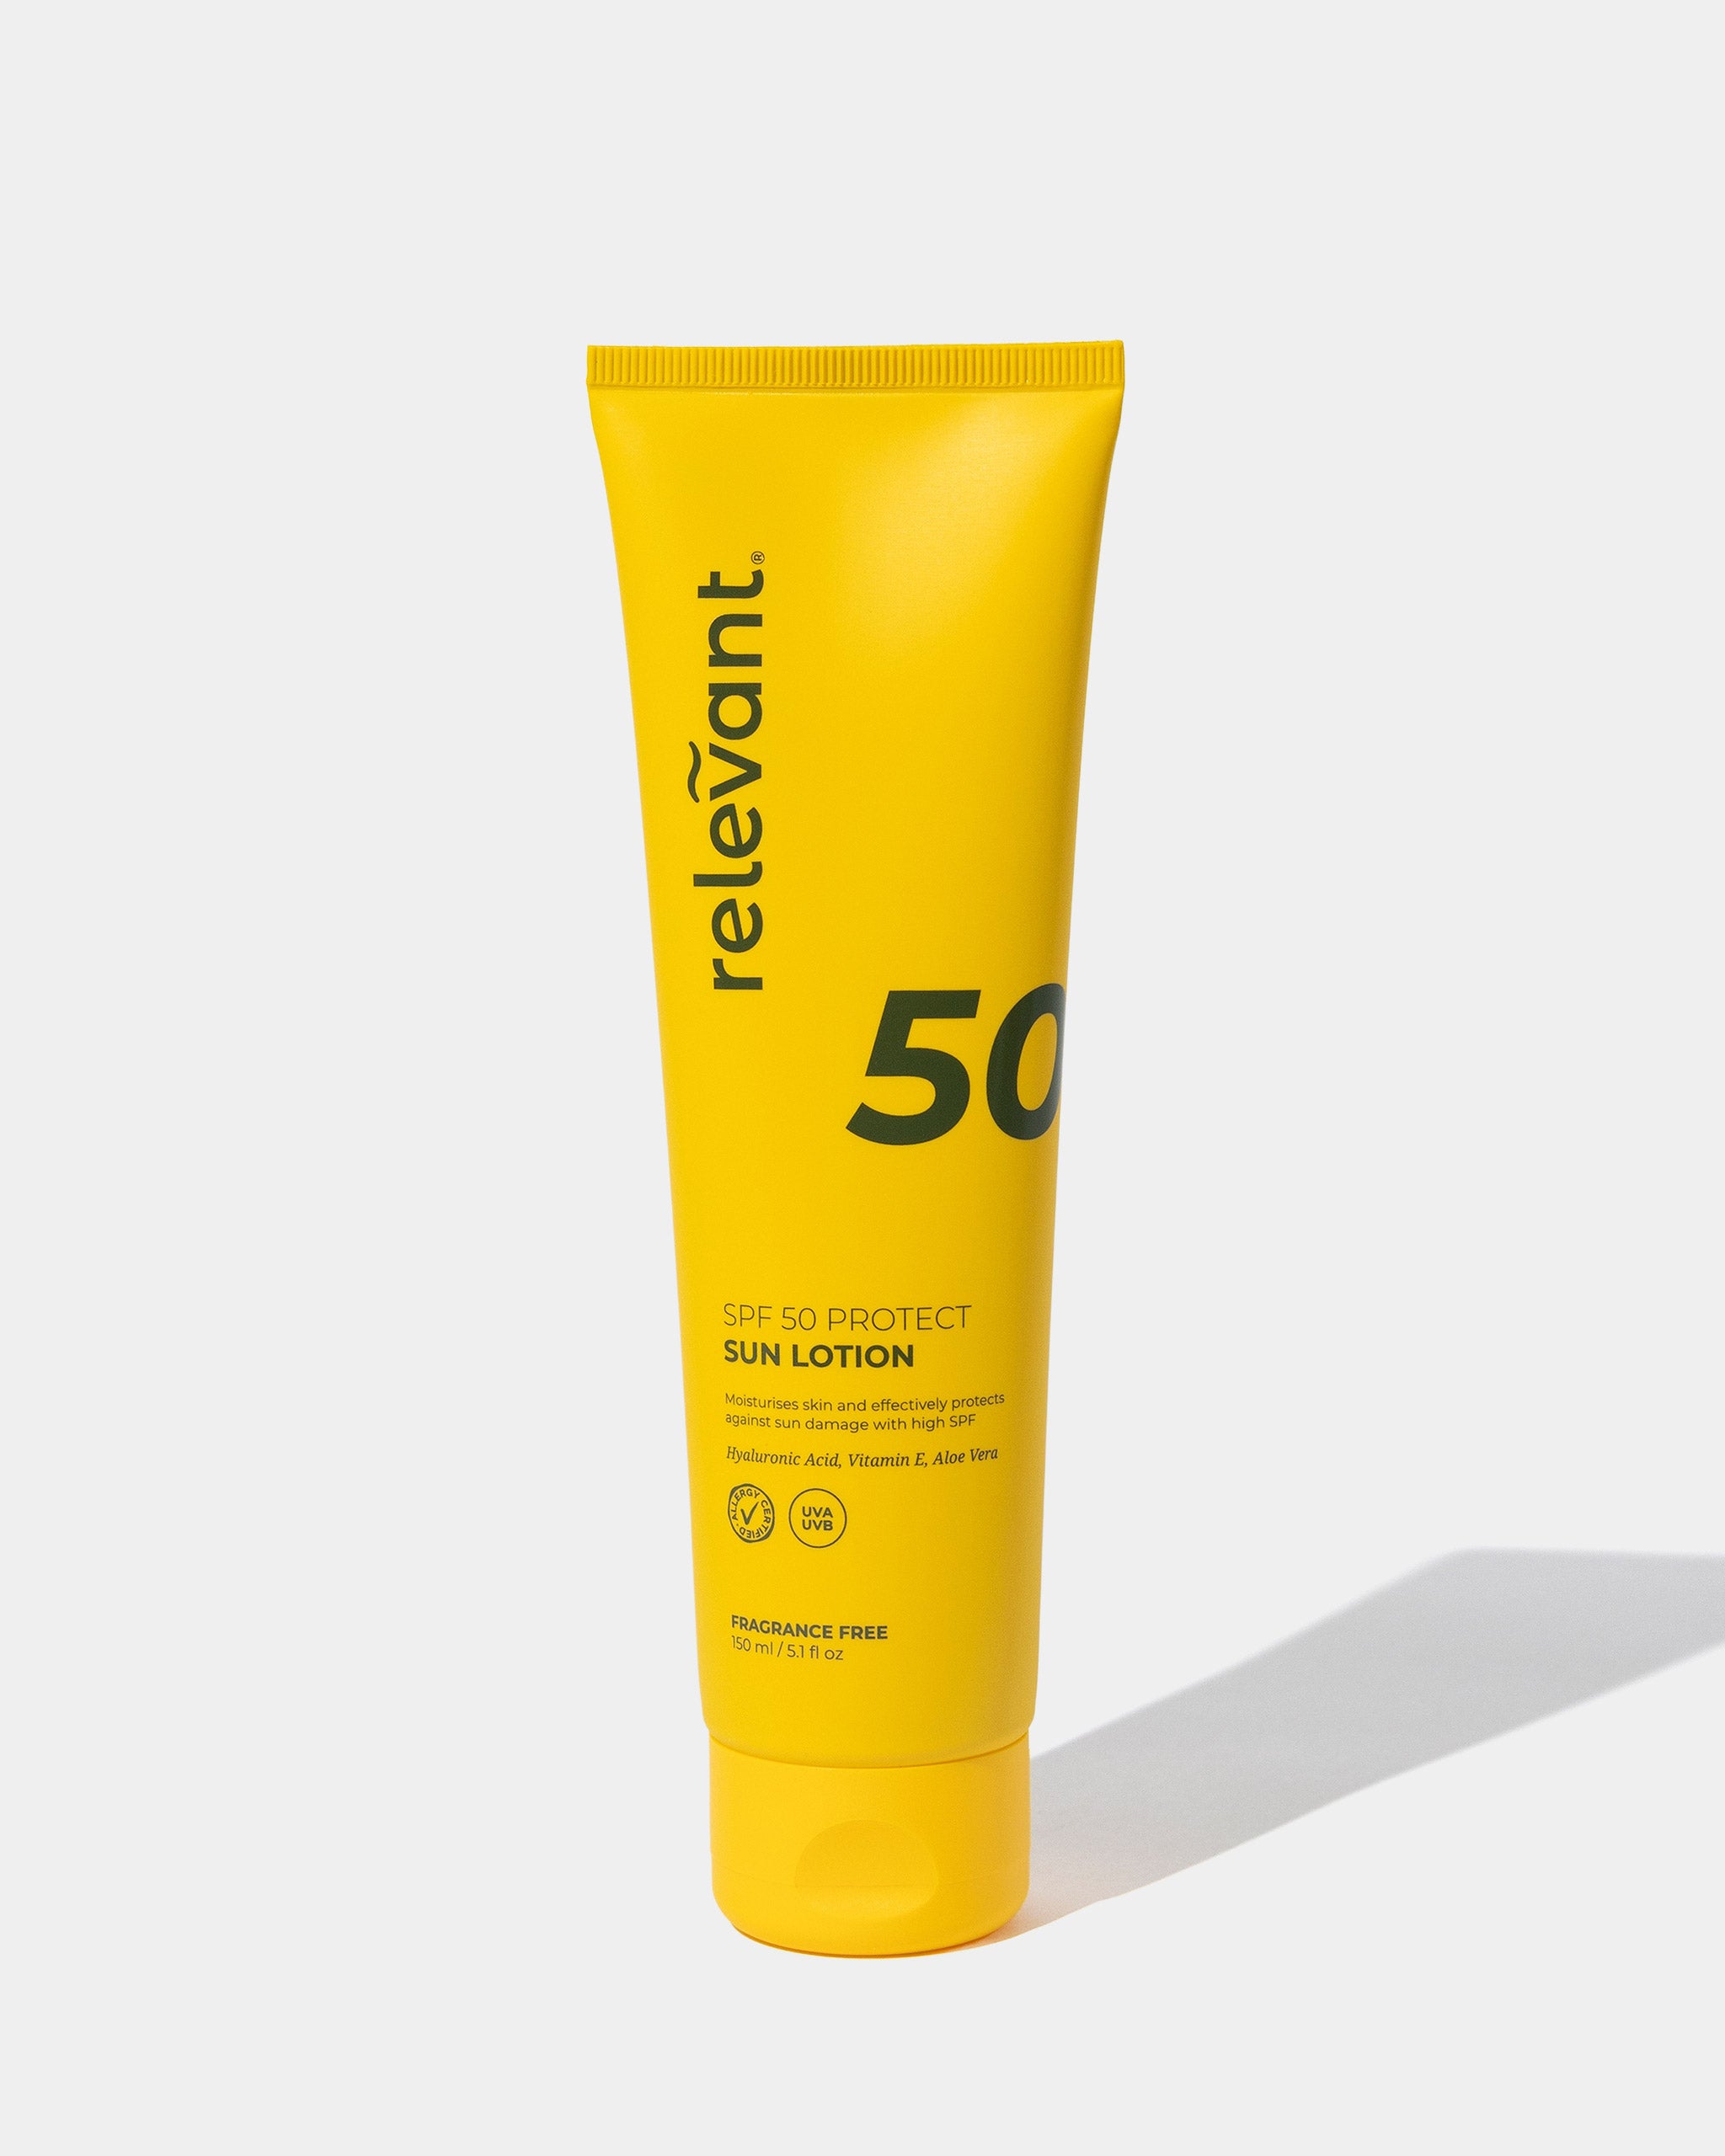 Relevant SPF 50 Protect Sun Lotion